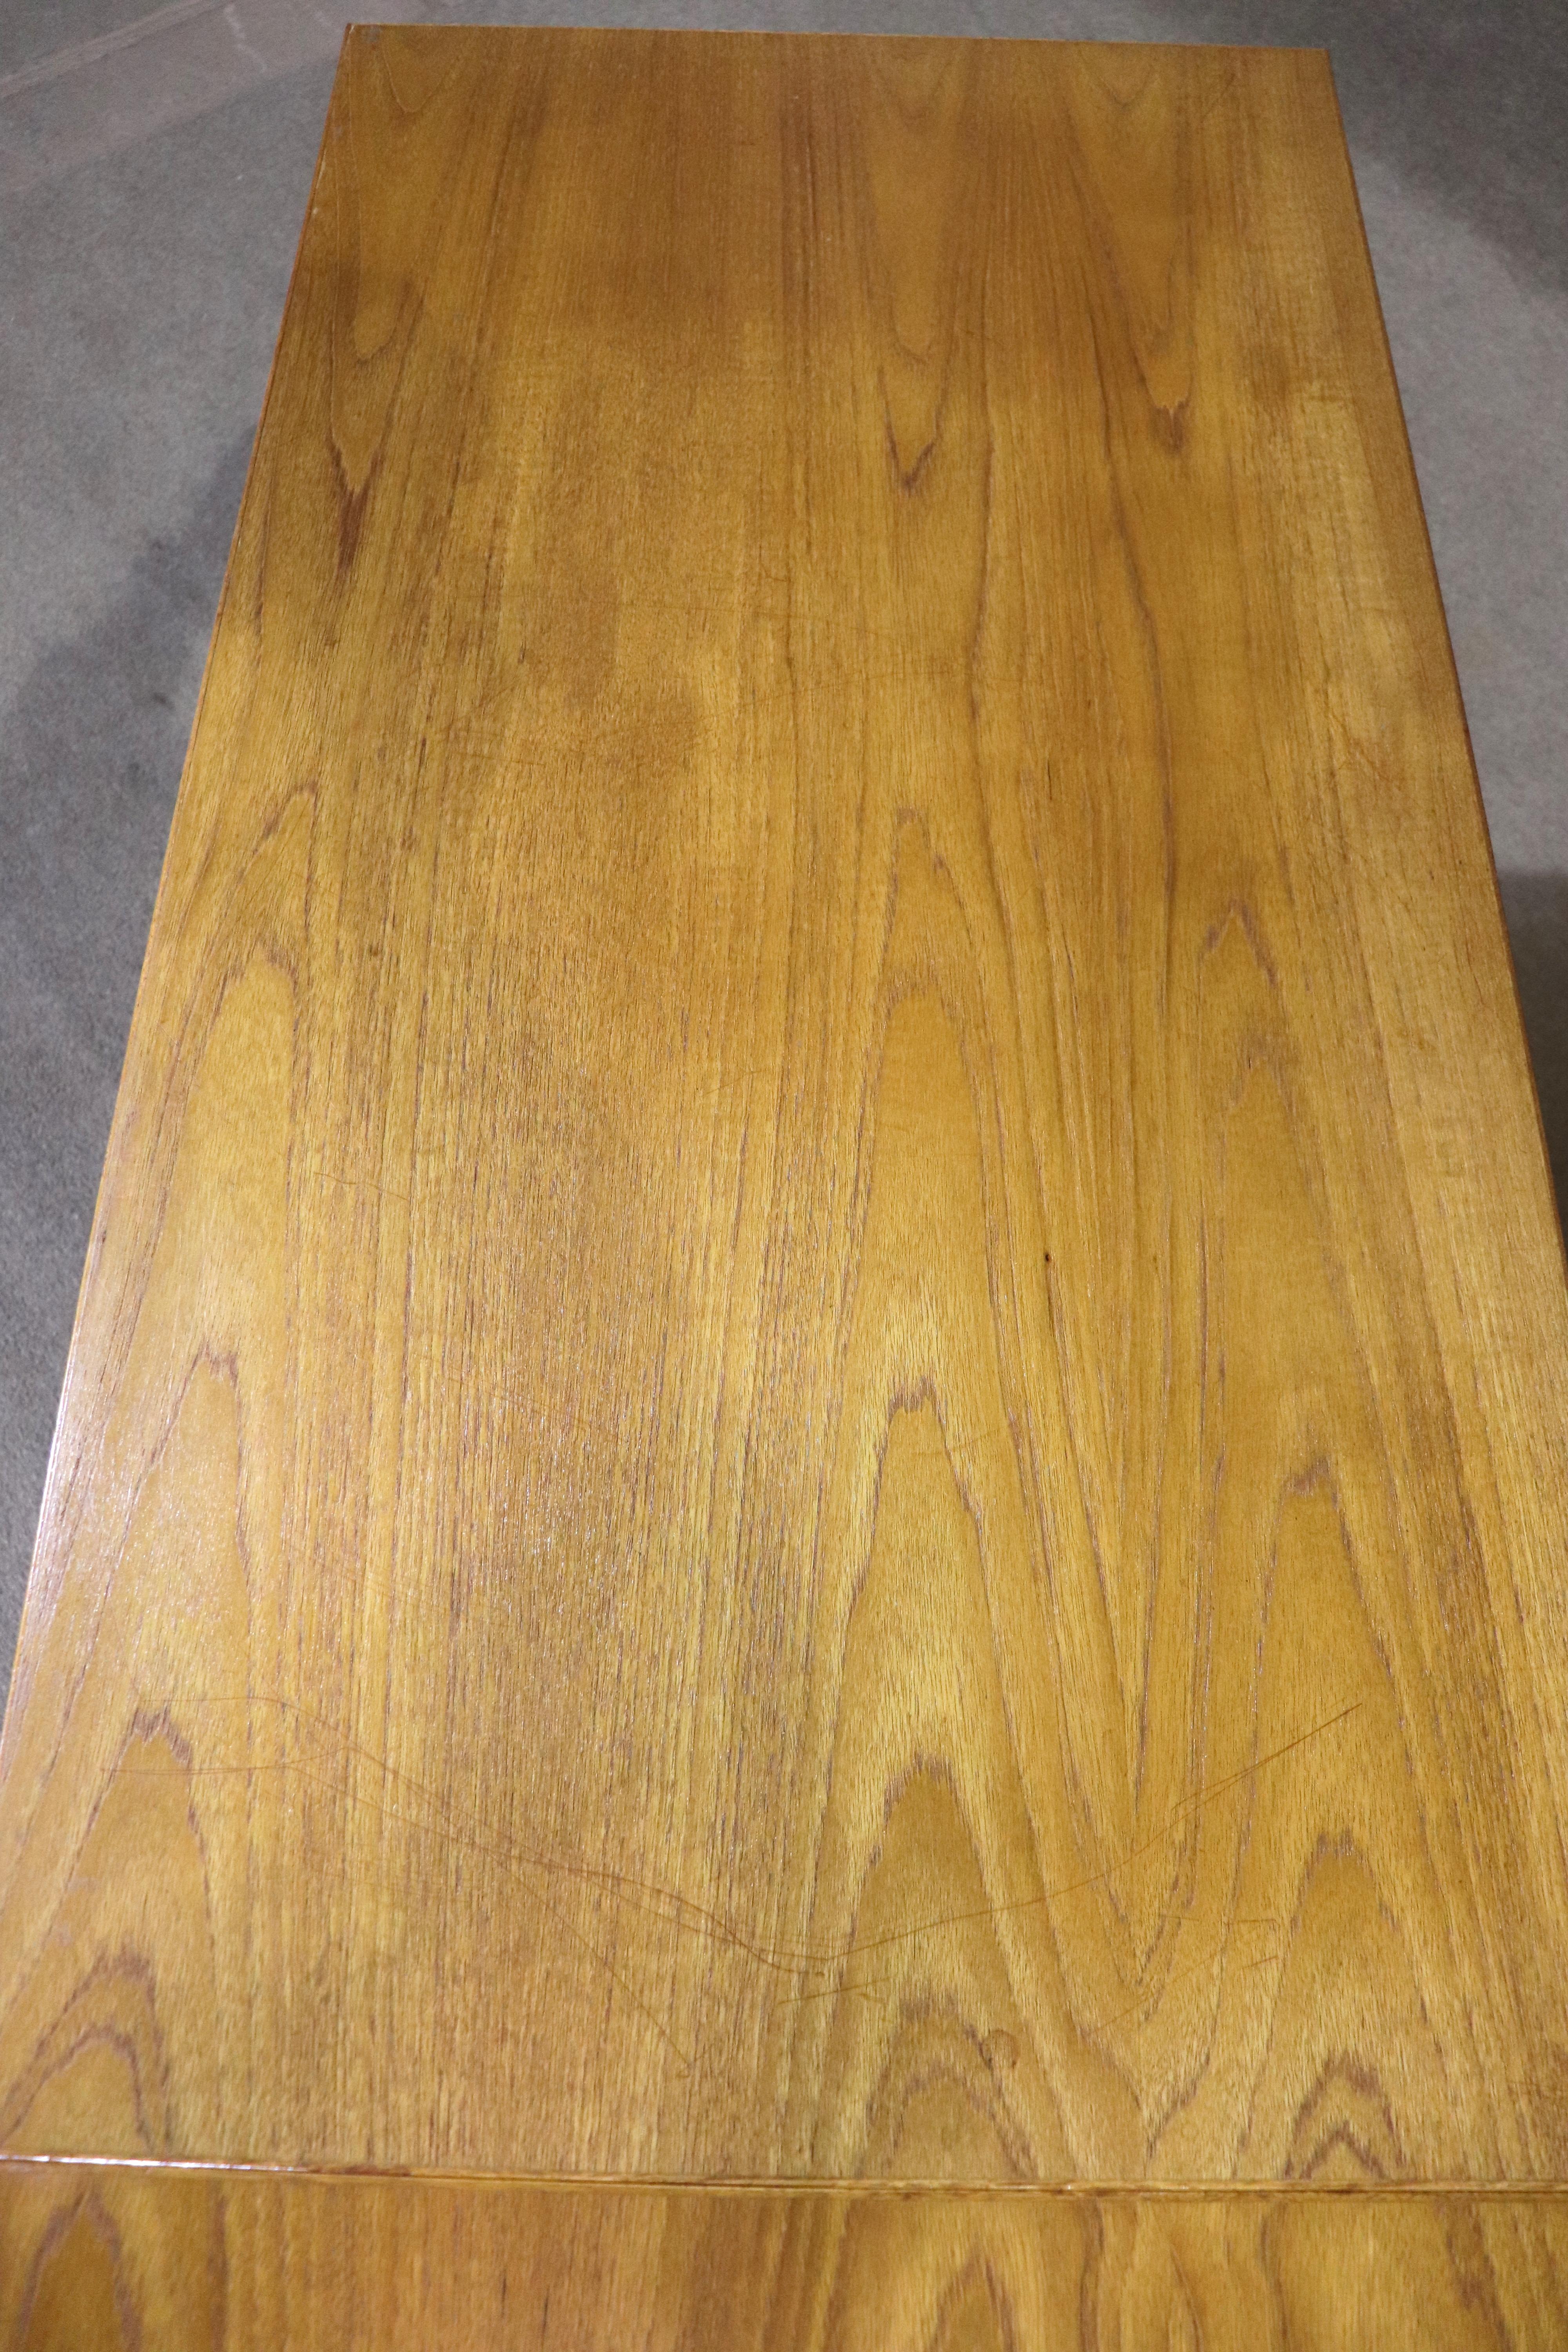 Drop Leaf Extending Desk In Good Condition For Sale In Brooklyn, NY